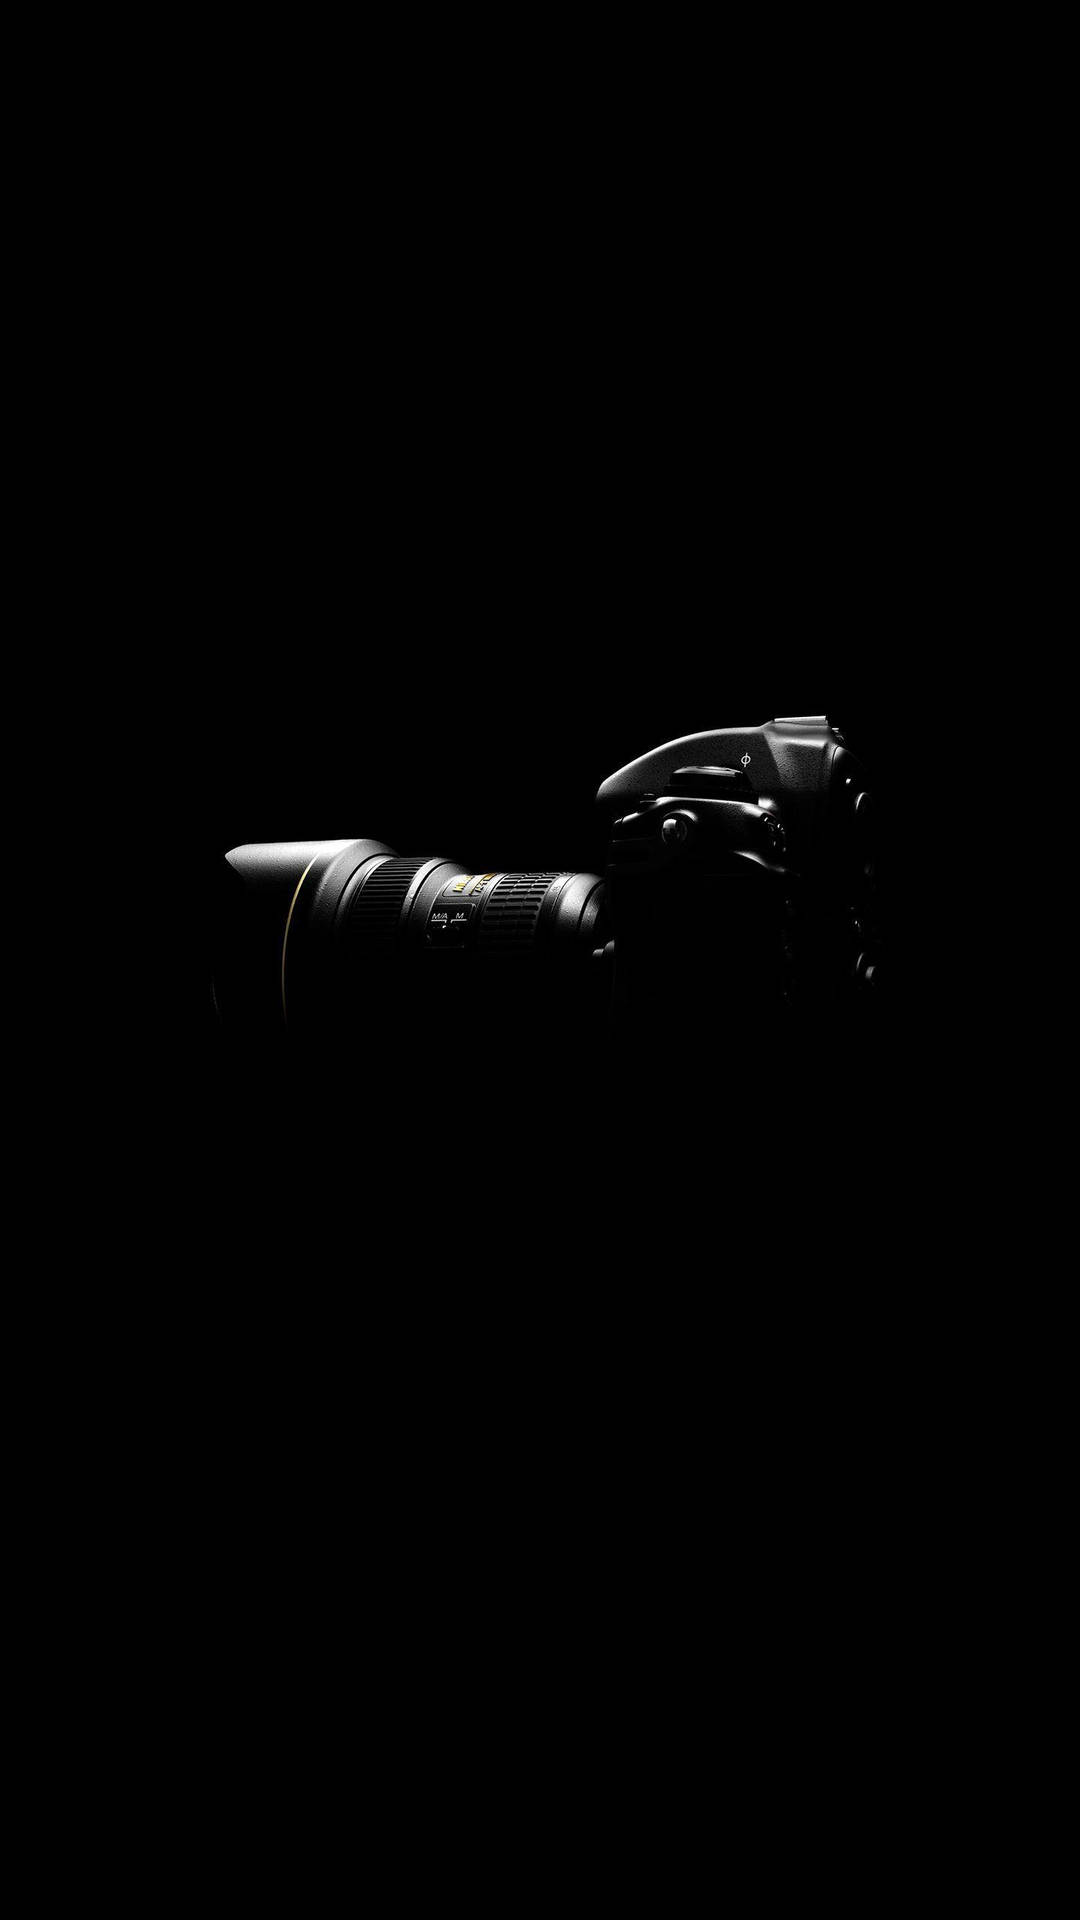 Classic Camera Silhouette On Super Amoled Background Background